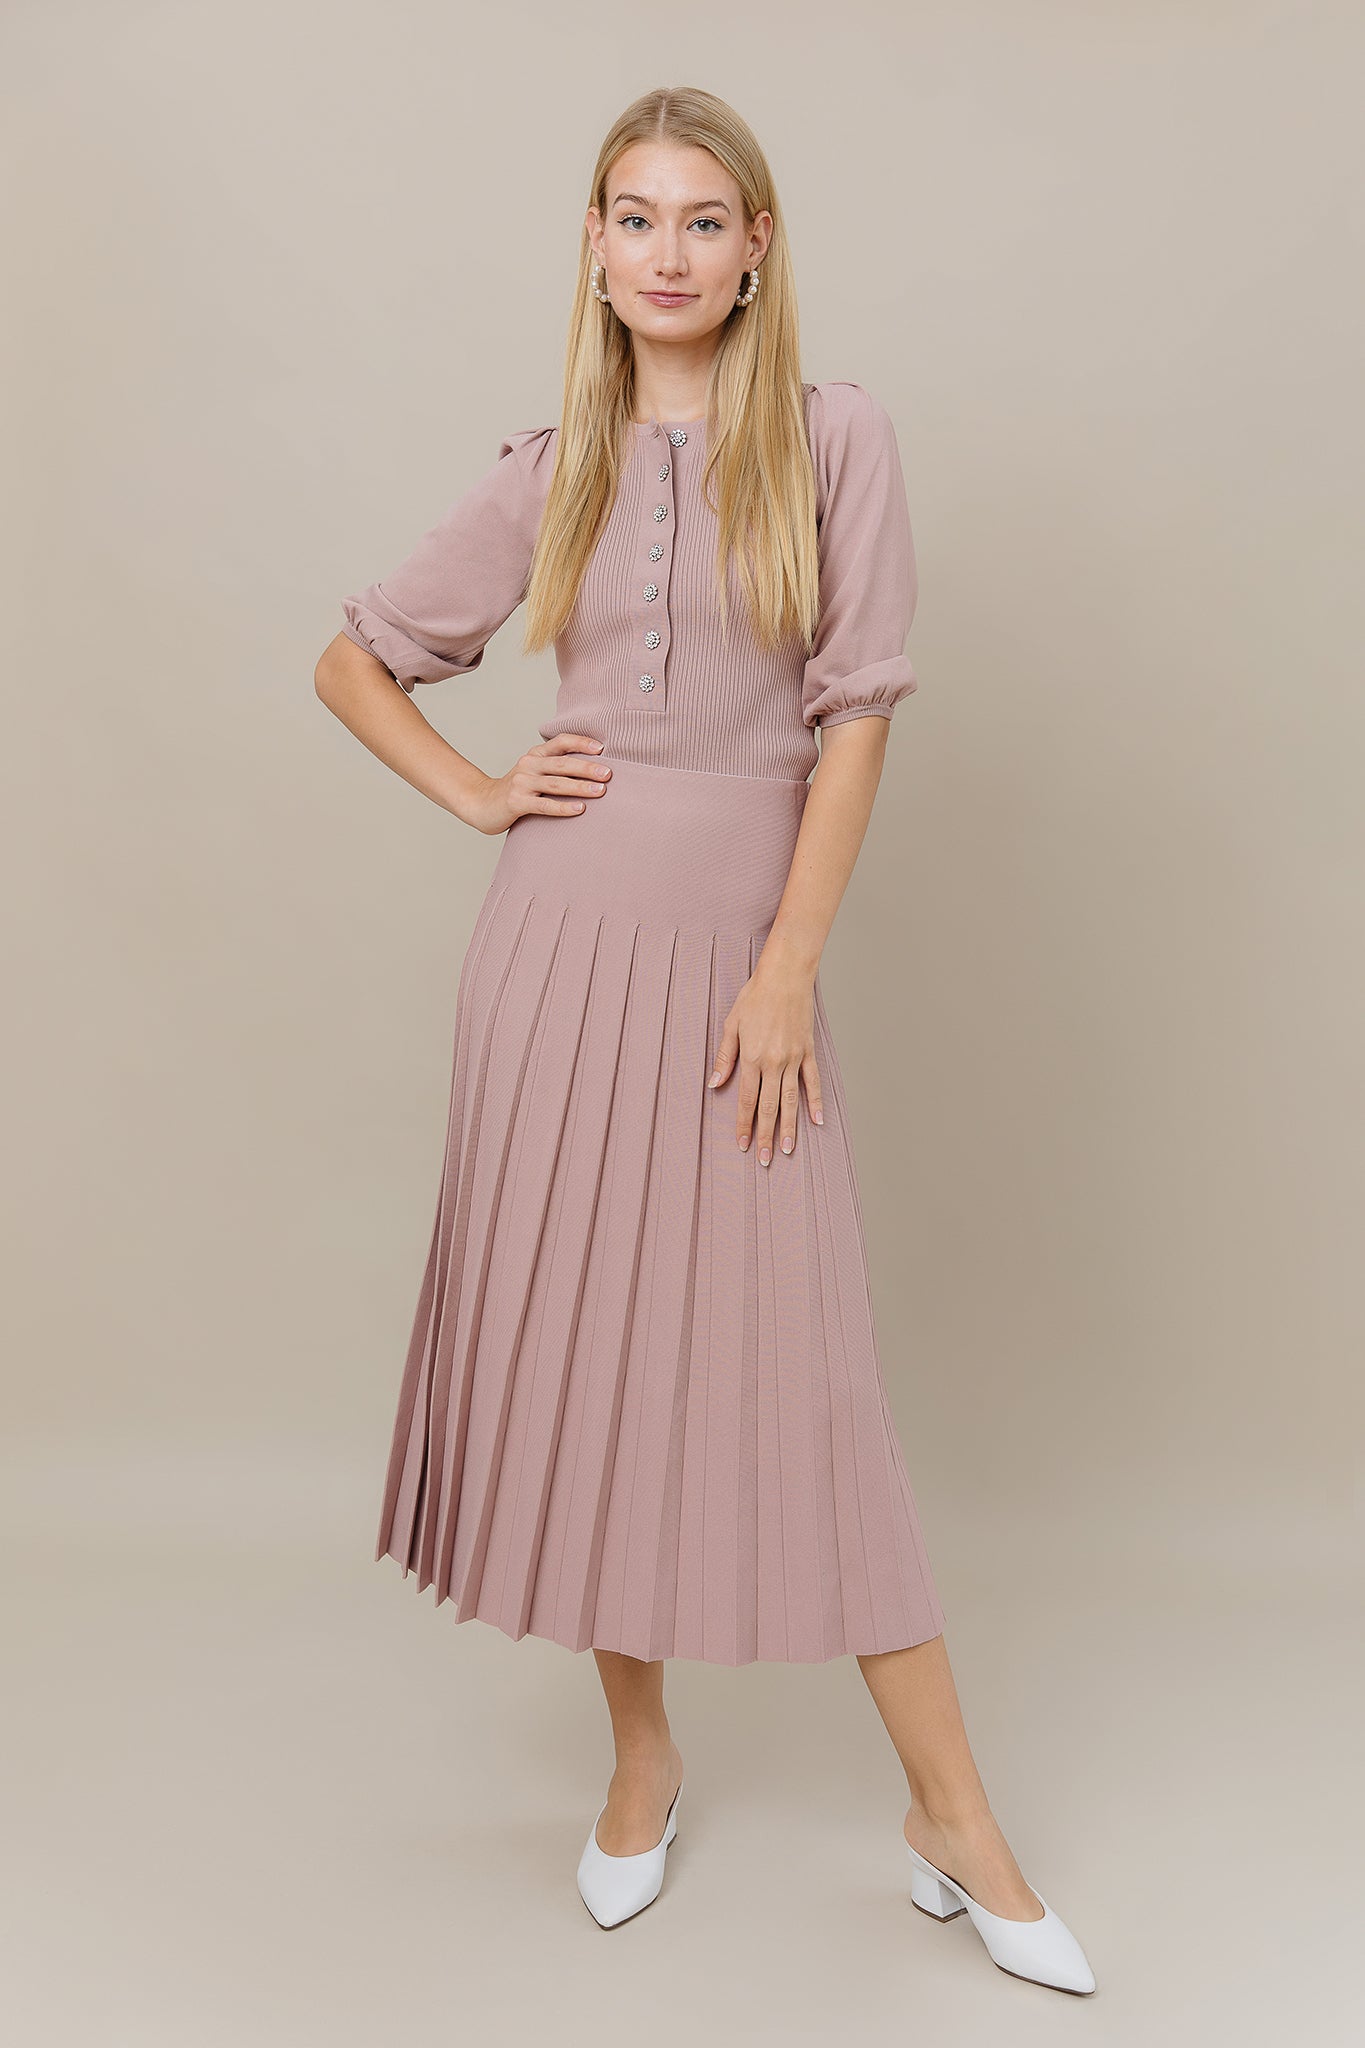 The Maxi Infinity Skirt in Dusty Rose